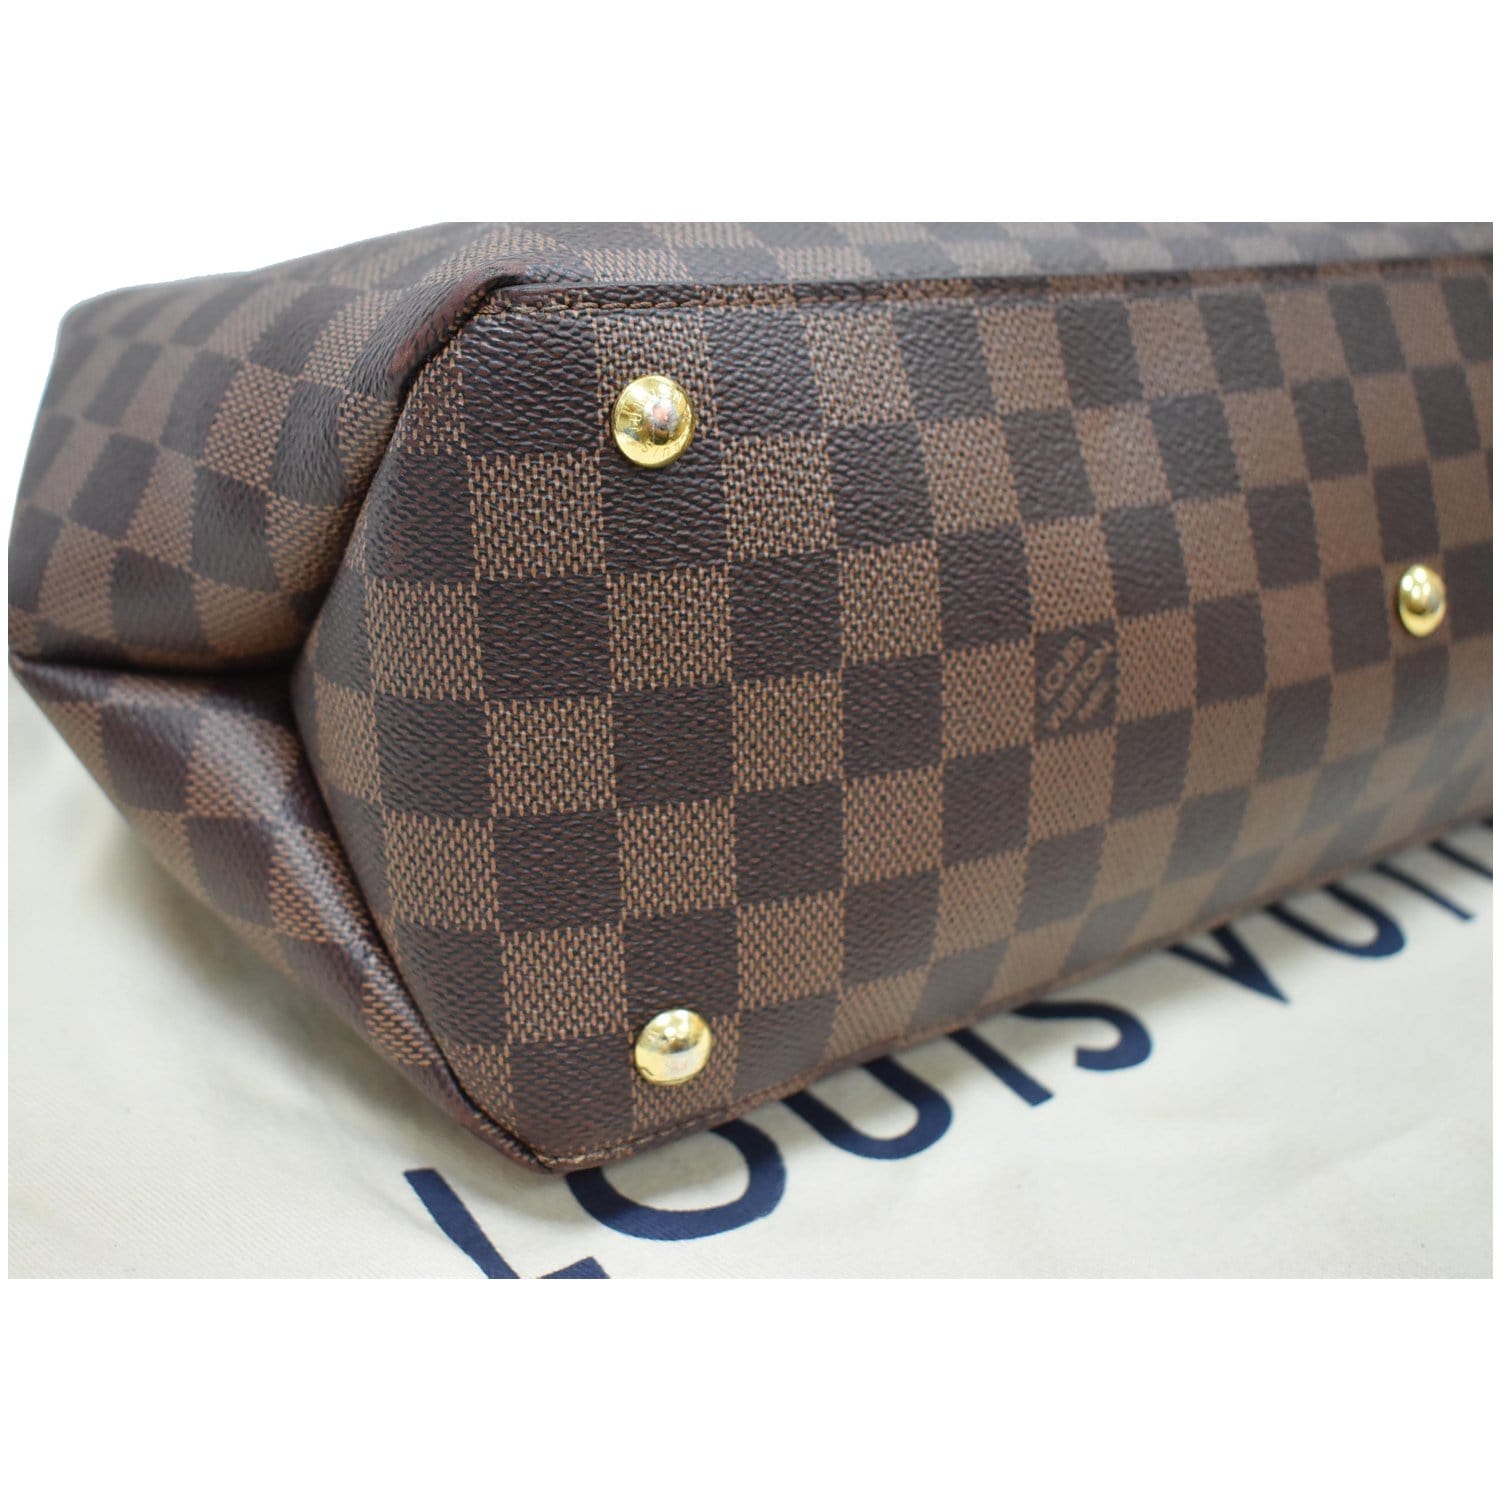 Love this great classic Louis Vuitton Damier Riverside Bag with both top  handle and long strap @onquestyle #store #louisvuitton…